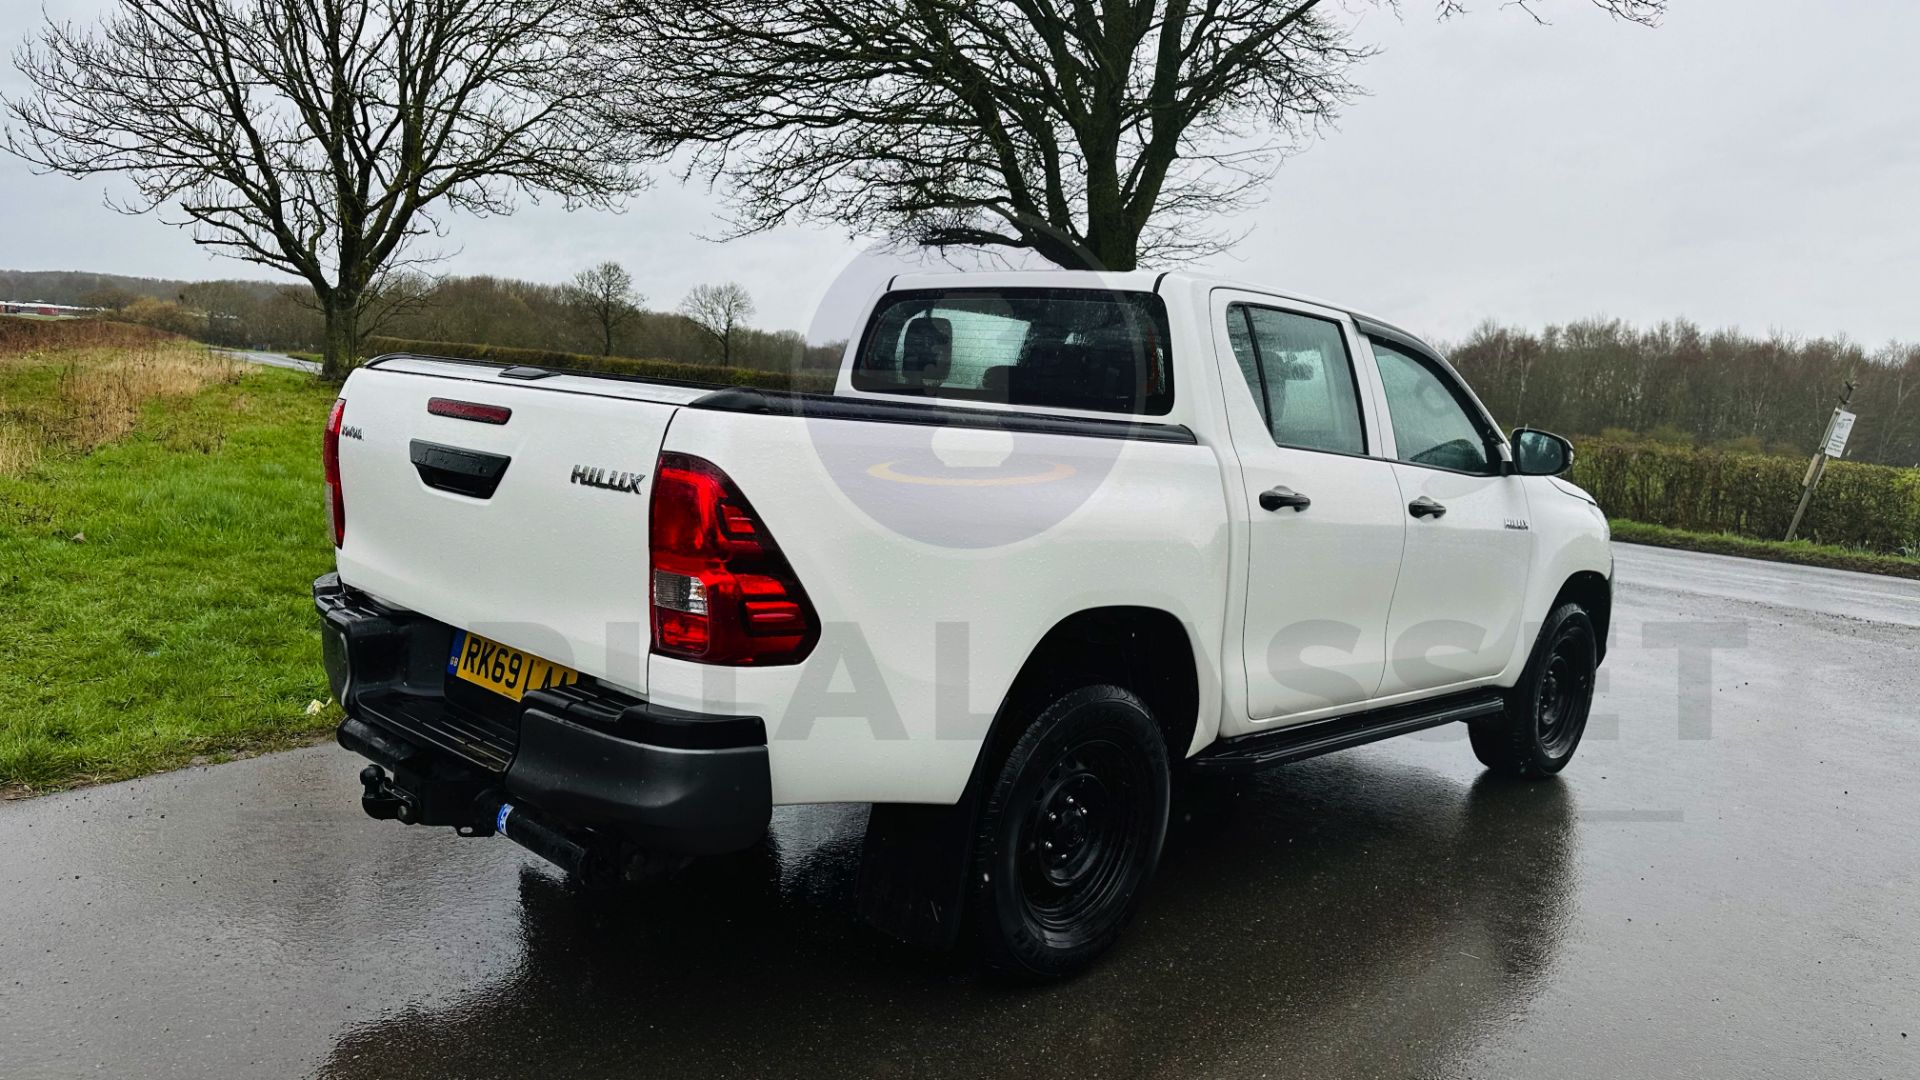 TOYOTA HILUX *DOUBLE CAB PICK-UP* (2020 - EURO 6) 2.4 D-4D - AUTO STOP/START *AIR CON* (1 OWNER) - Image 16 of 48